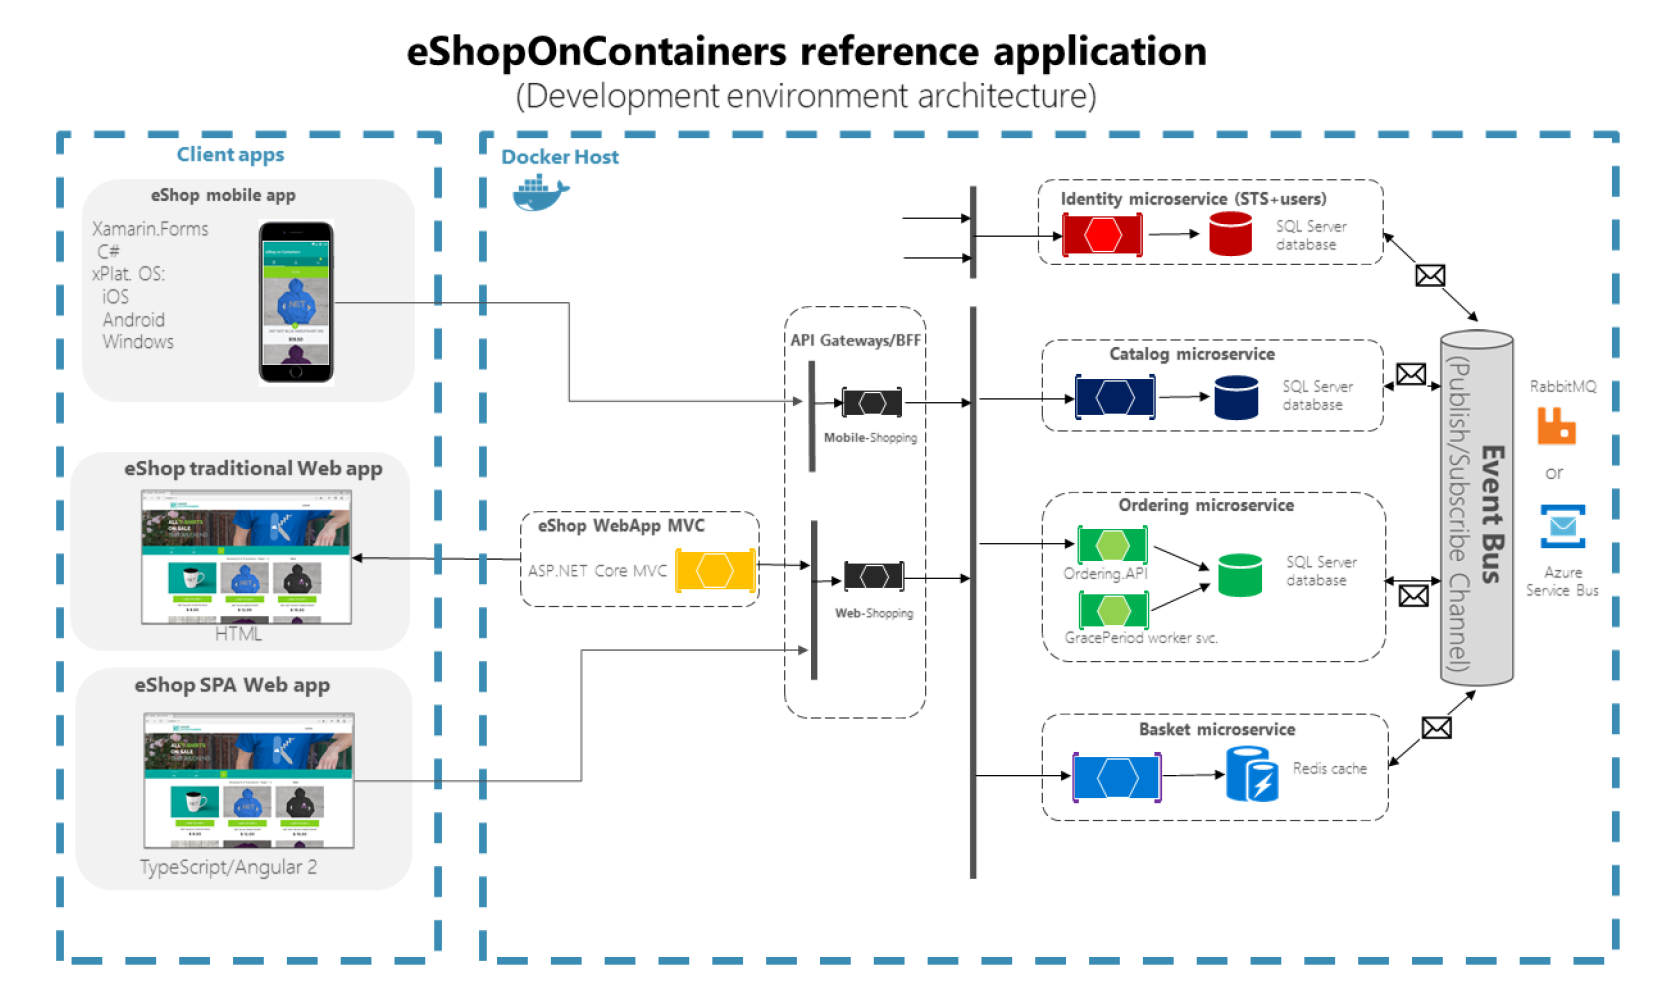 The eShopOnContainers reference application architecture